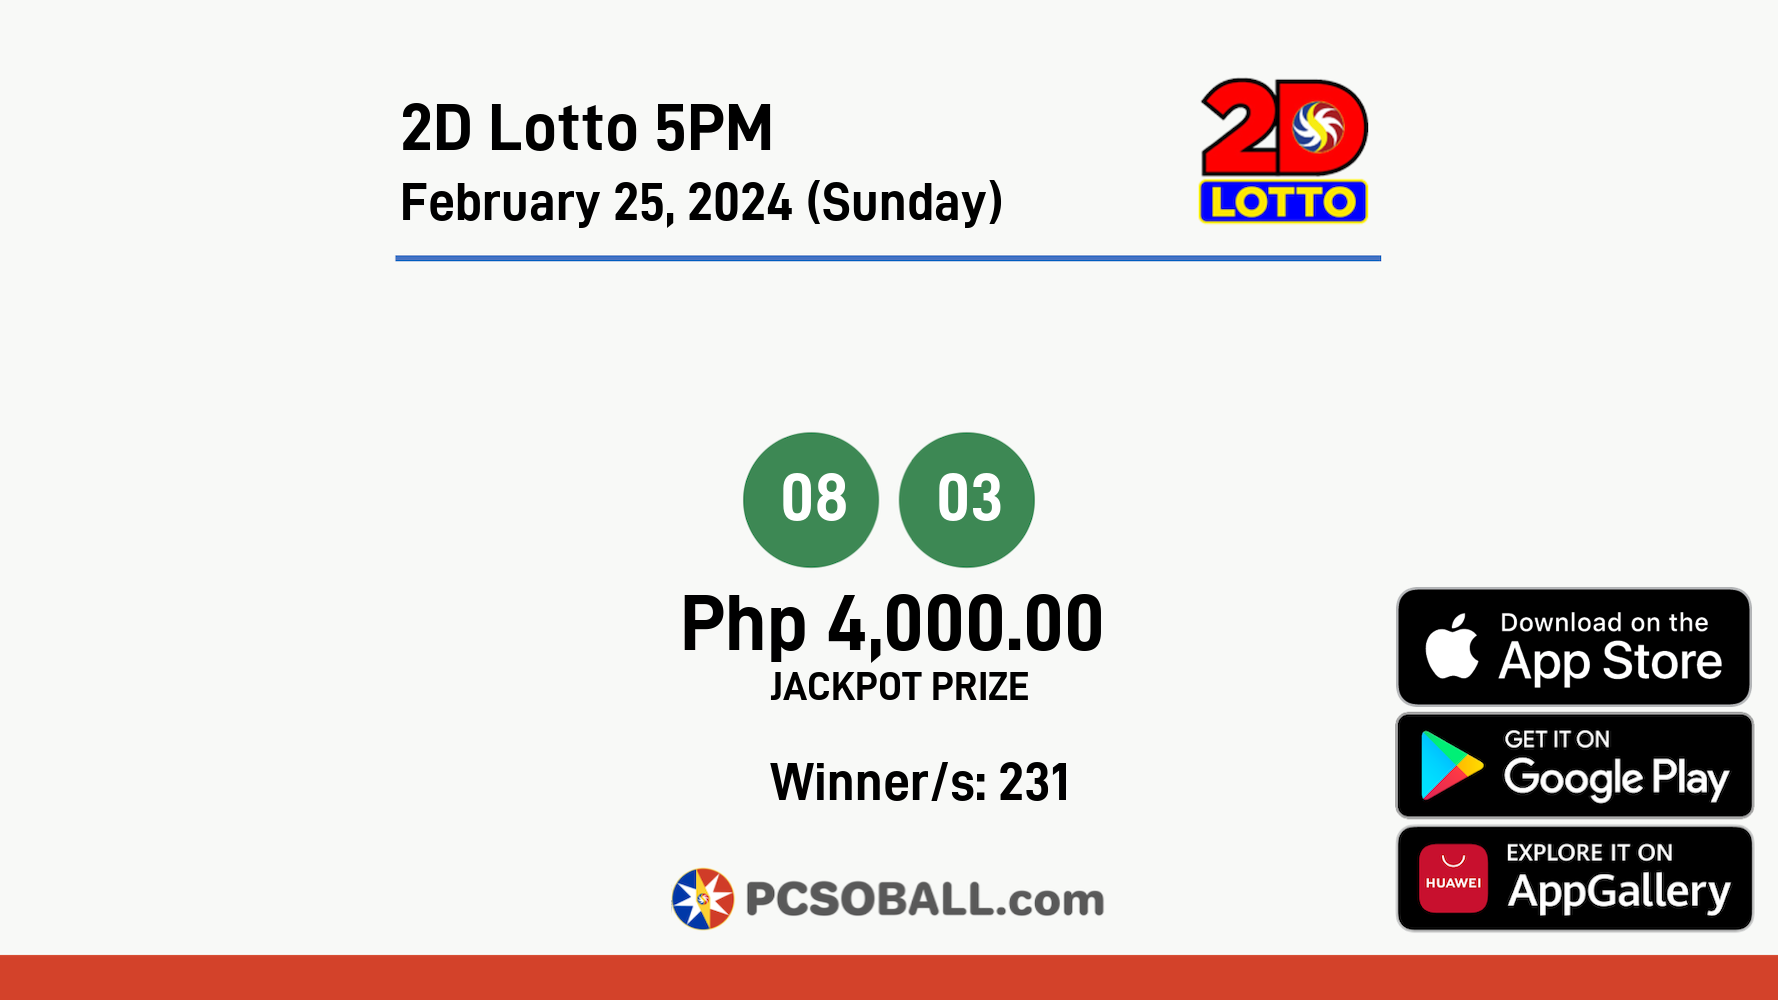 2D Lotto 5PM February 25, 2024 (Sunday) Result